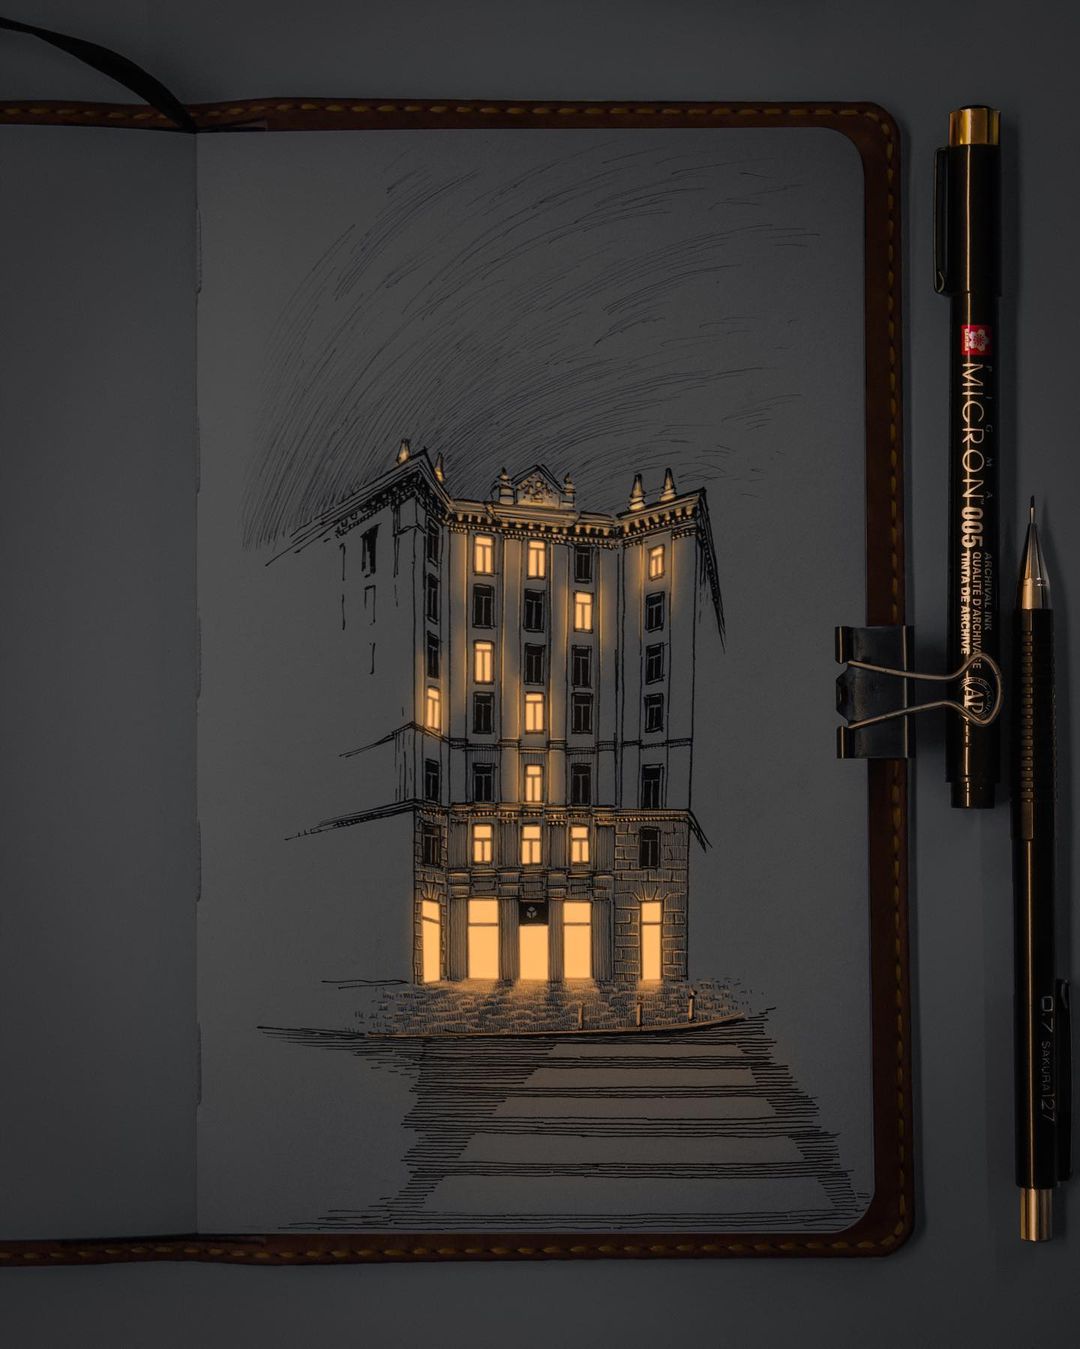 Glowing Archisketch Gorgeously Illuminated Architectural Sketches By Nikita Busyak 8